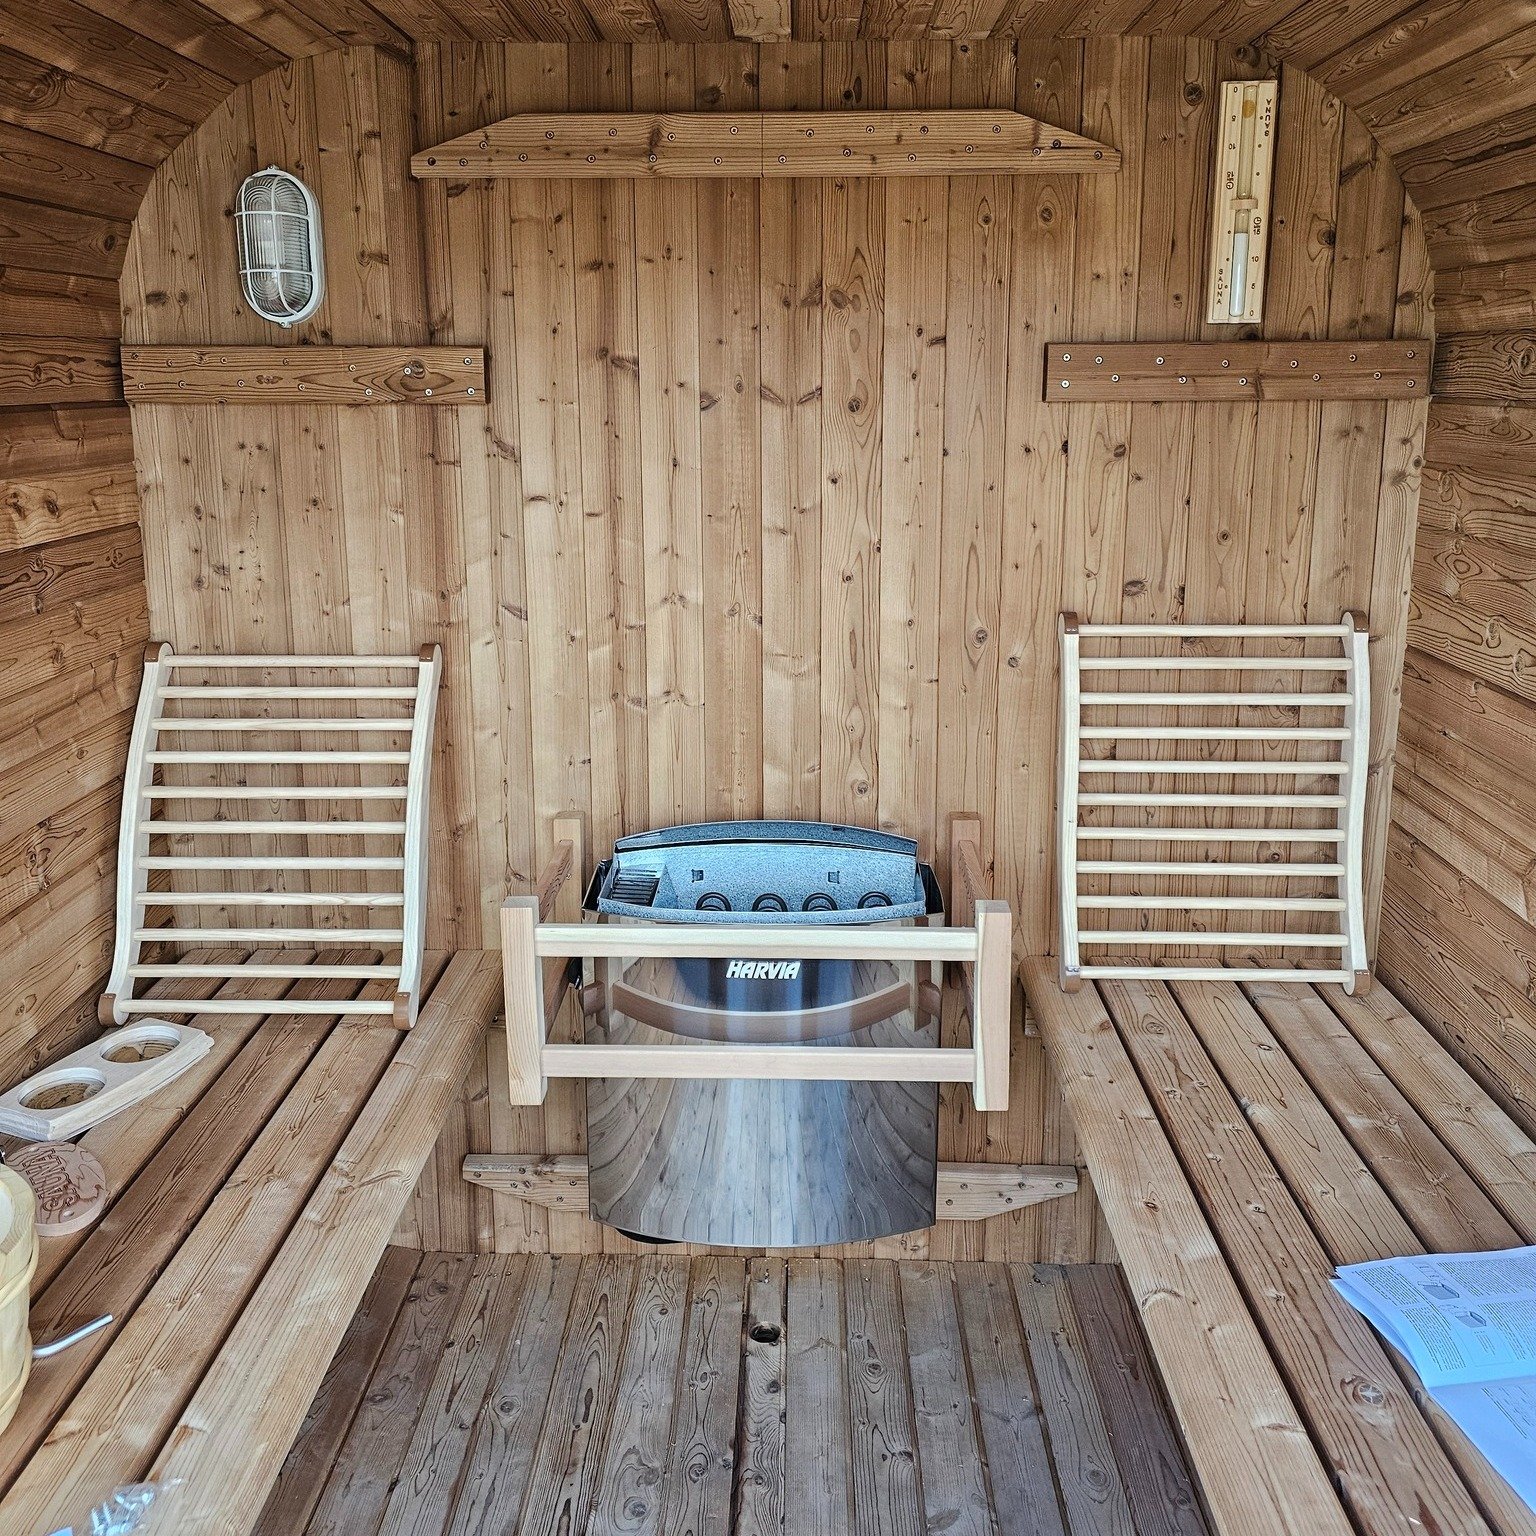 Things are really starting to heat up! 🔥
Here's a nice wee sauna we wired up for a customer in Kaiapoi